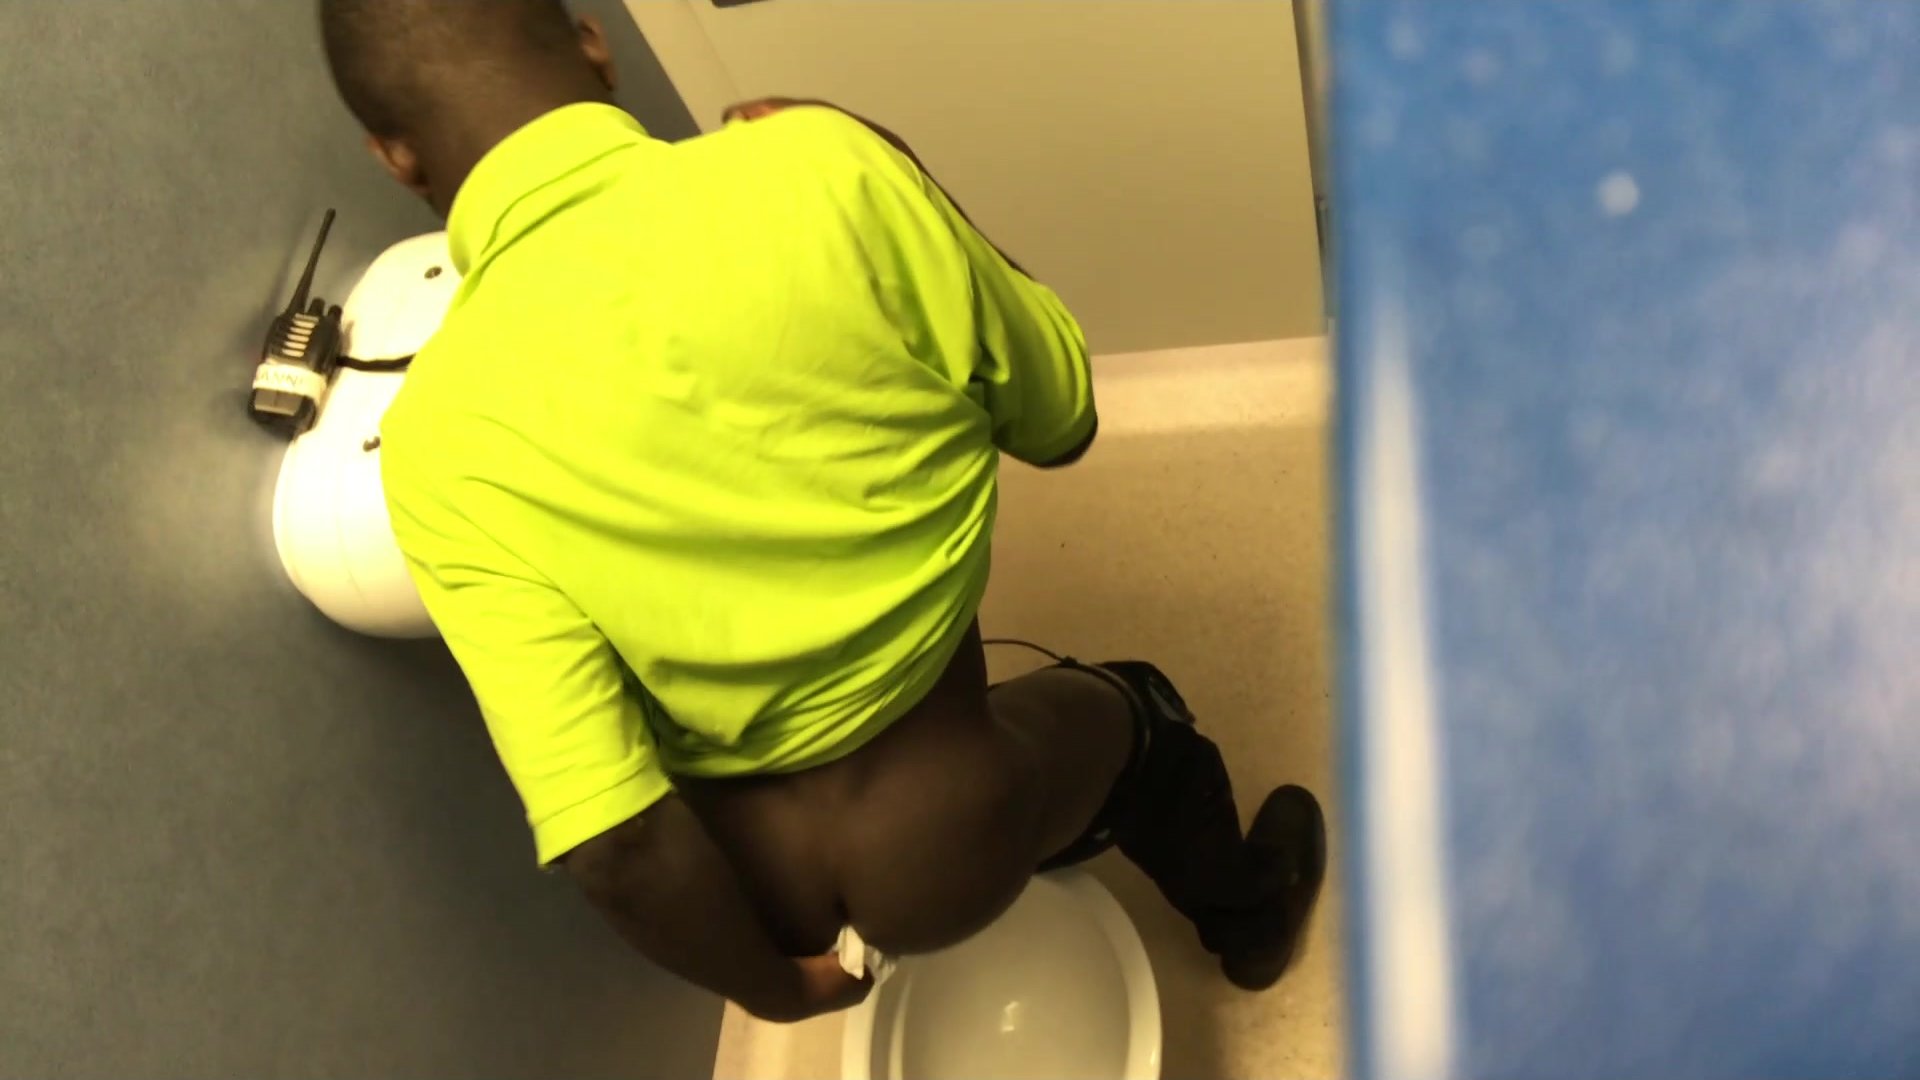 4. Gorgeous smooth-skinned black guy wiping